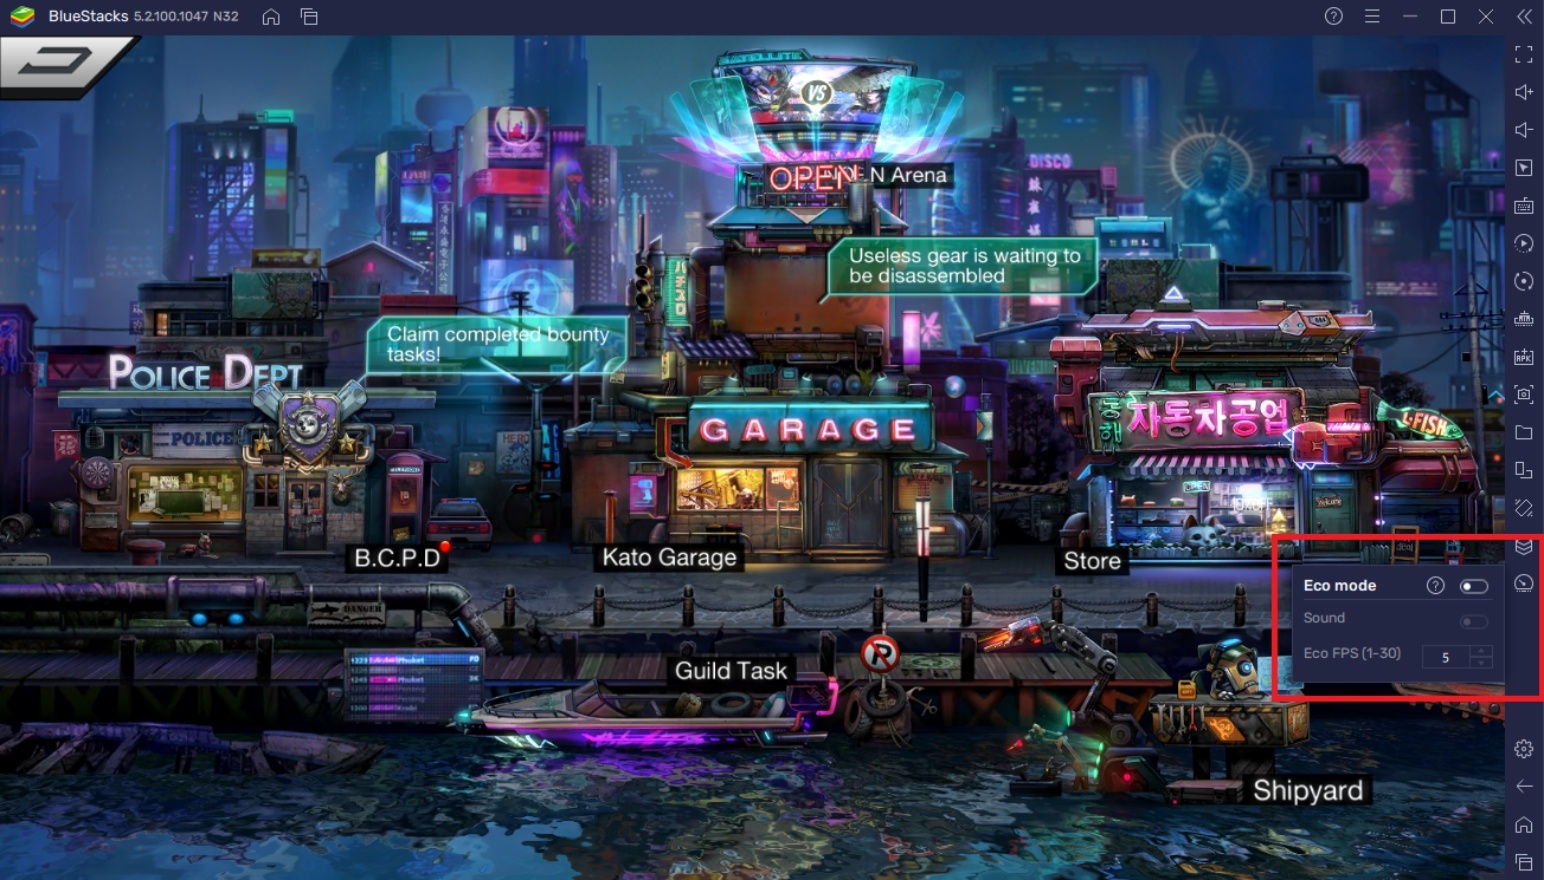 How To Play Battle Night: Cyberpunk-Idle RPG on PC with BlueStacks